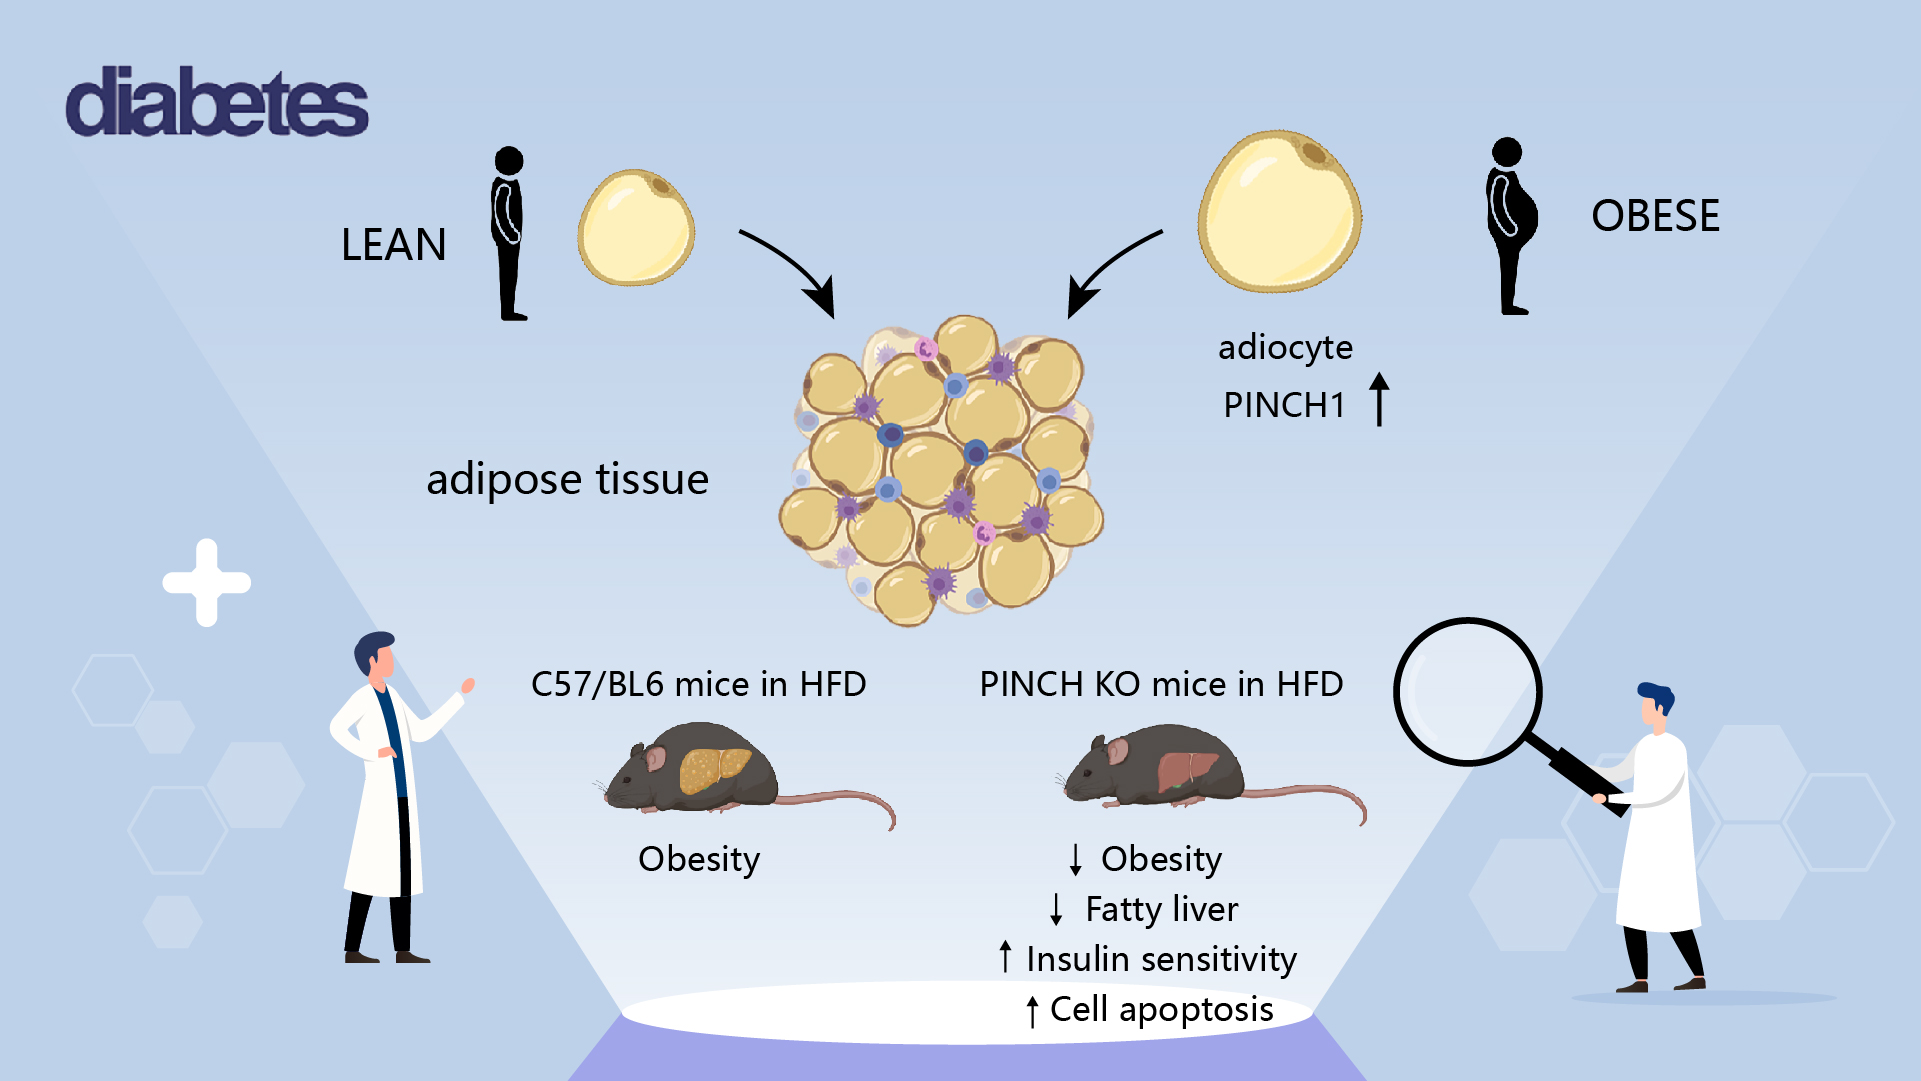 SUSTech Guozhi Xiao’s team publishes latest findings on mechanism of obesity and insulin resistance in diabetes